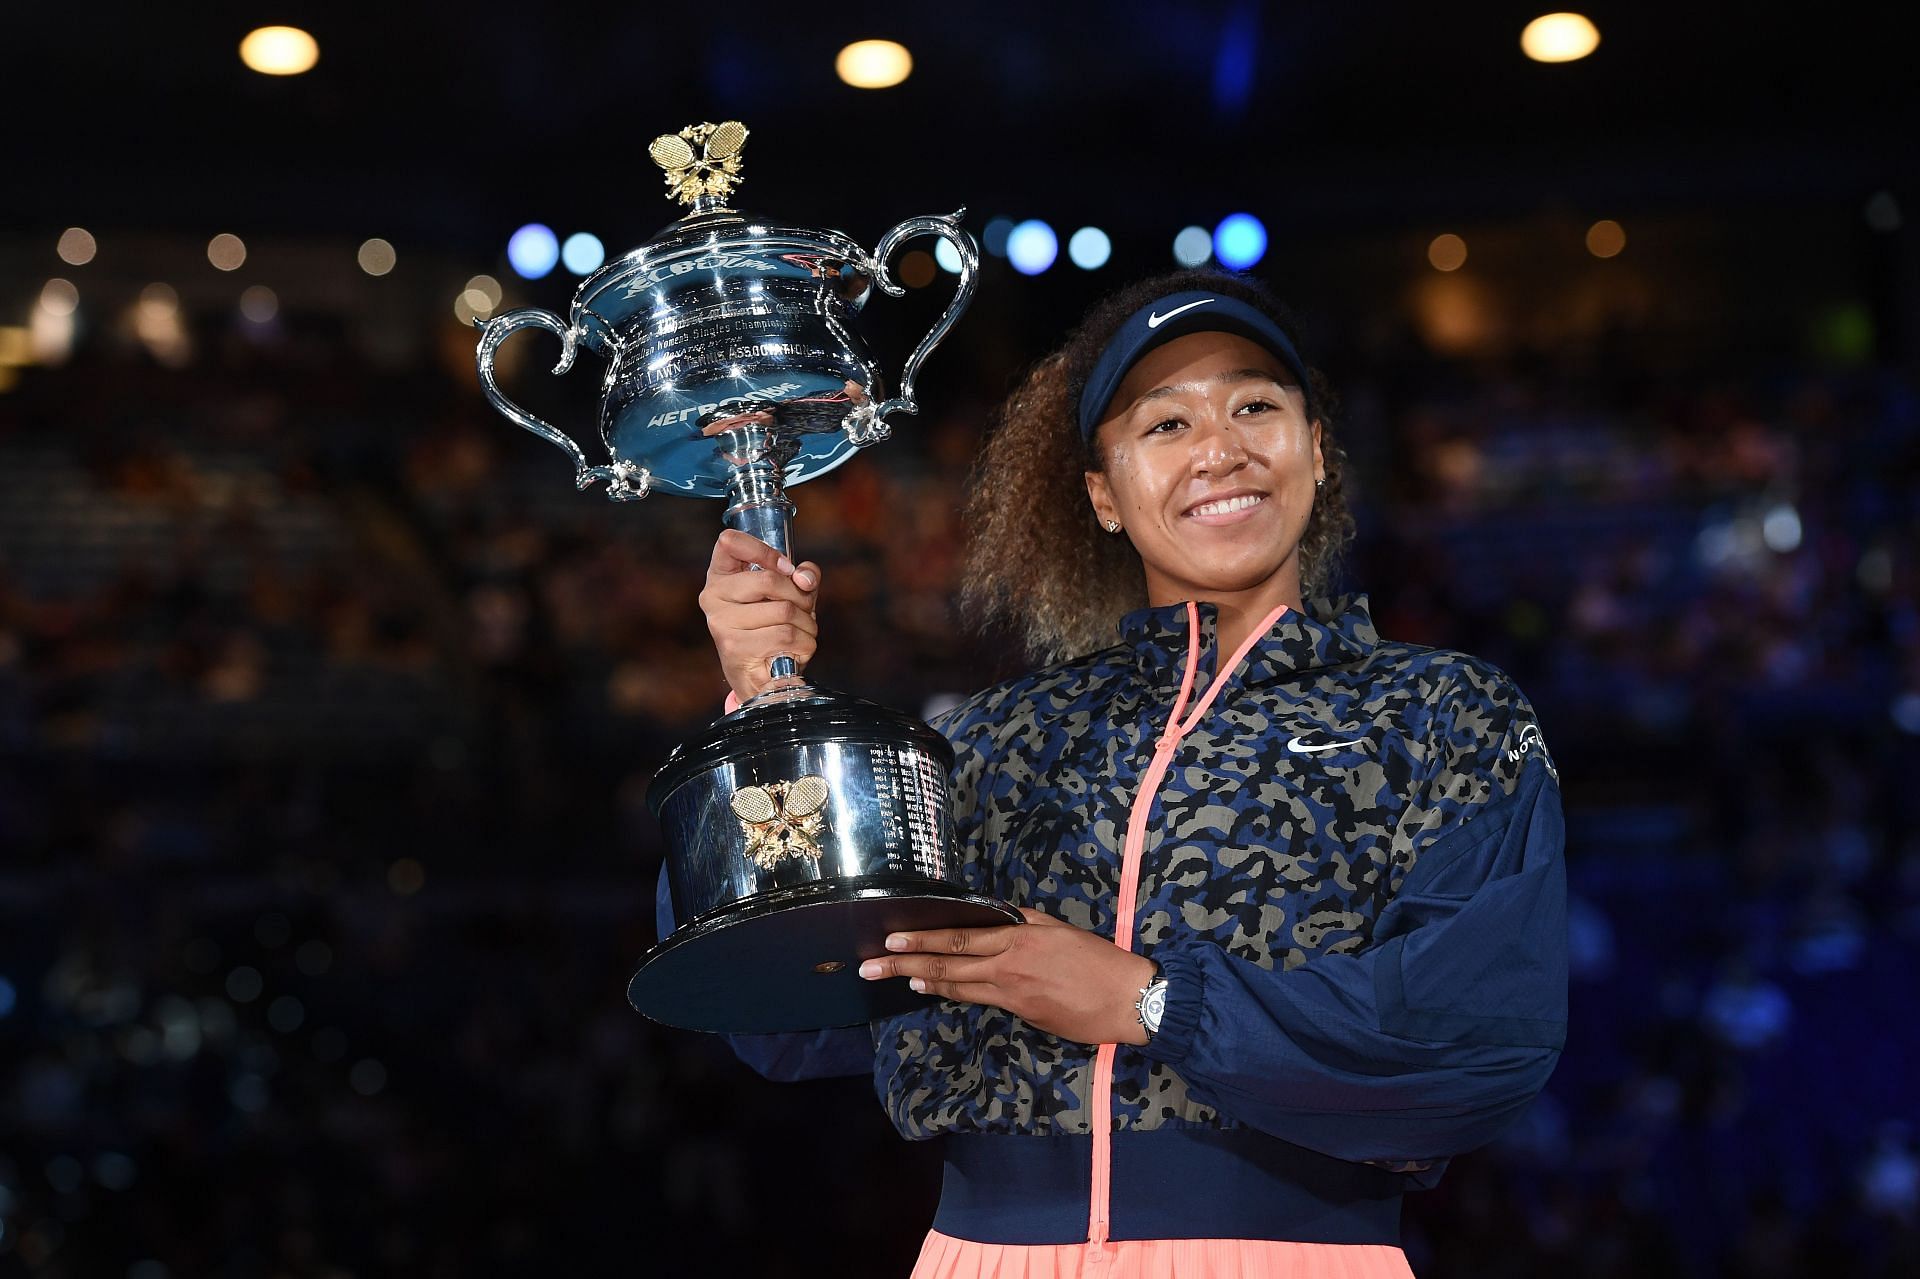 Naomi Osaka is the top seed at the Melbourne Summer Set 1.